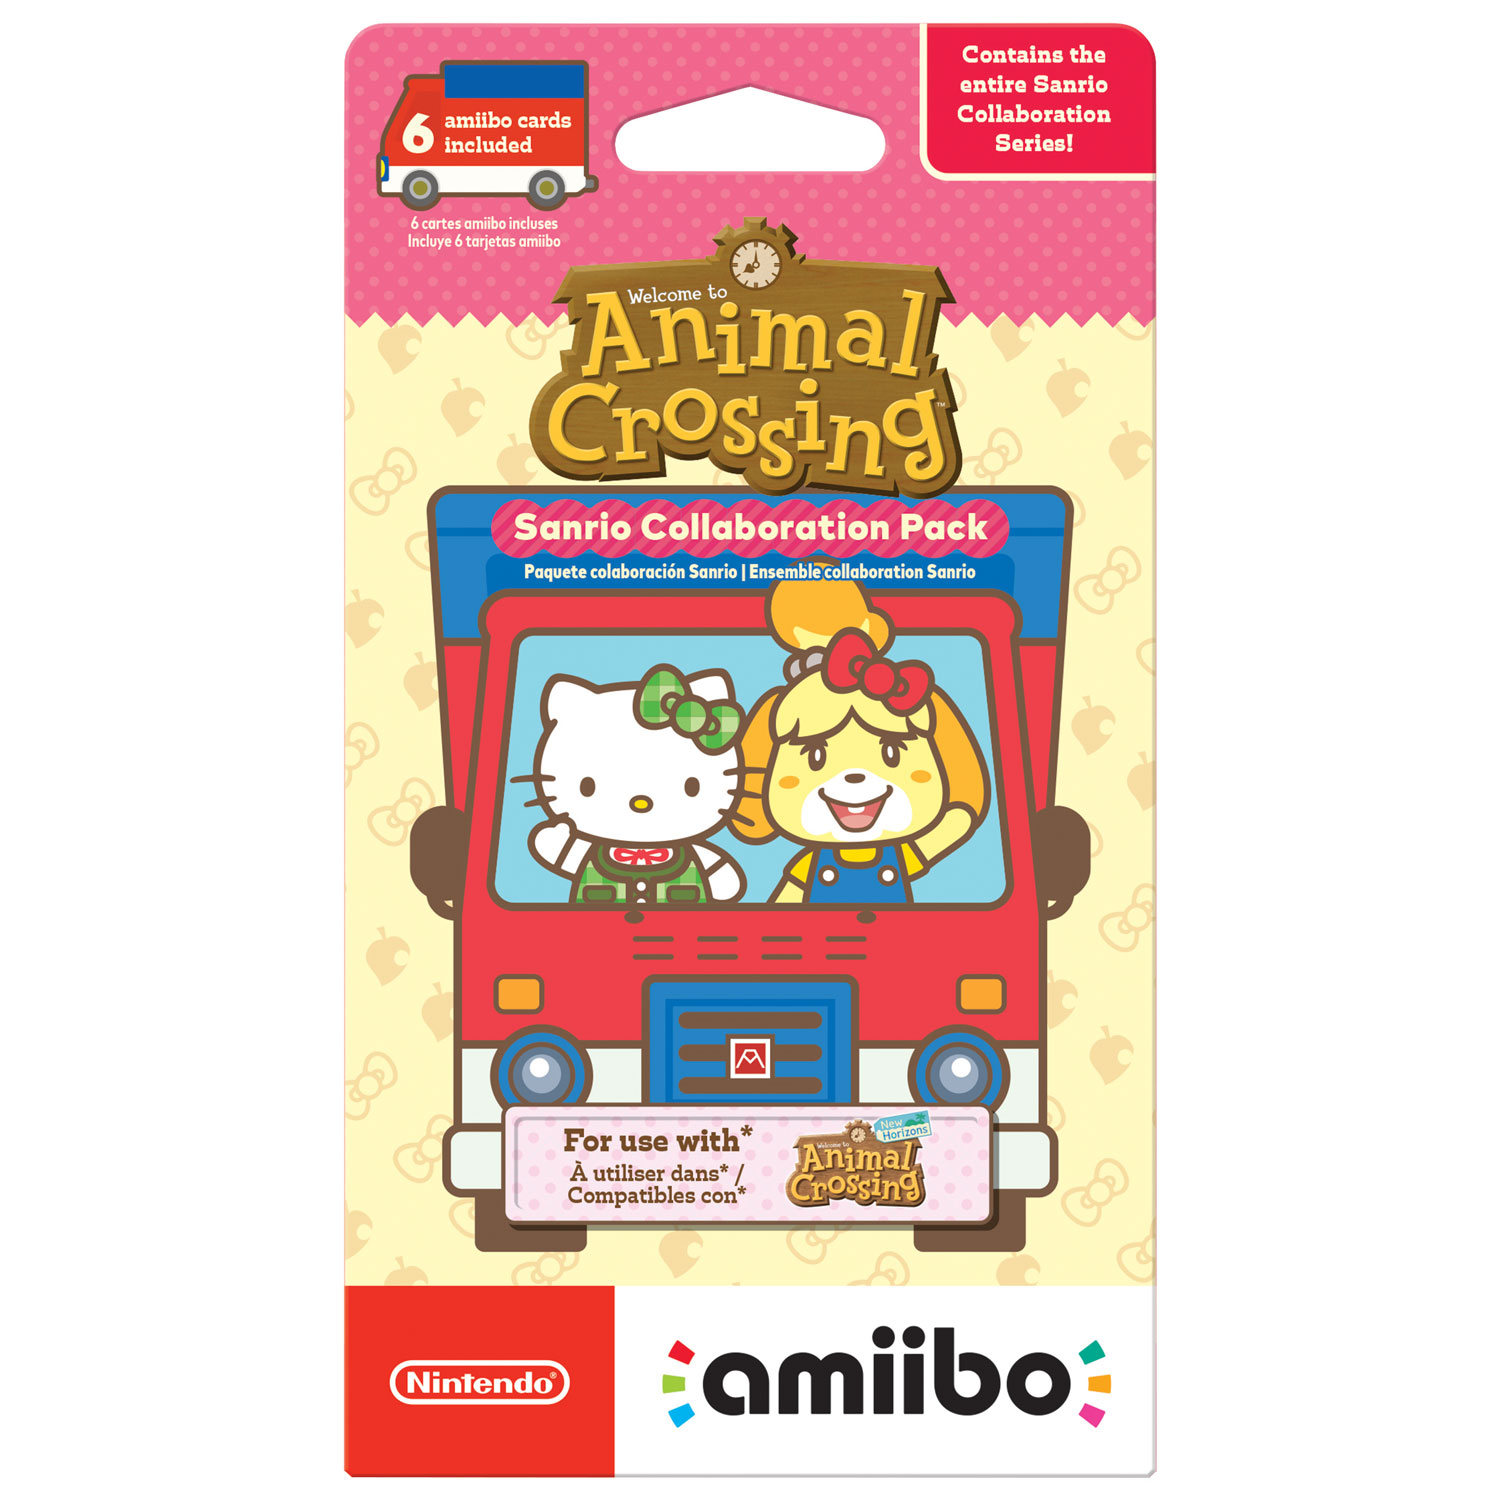 what stores sell animal crossing amiibo cards